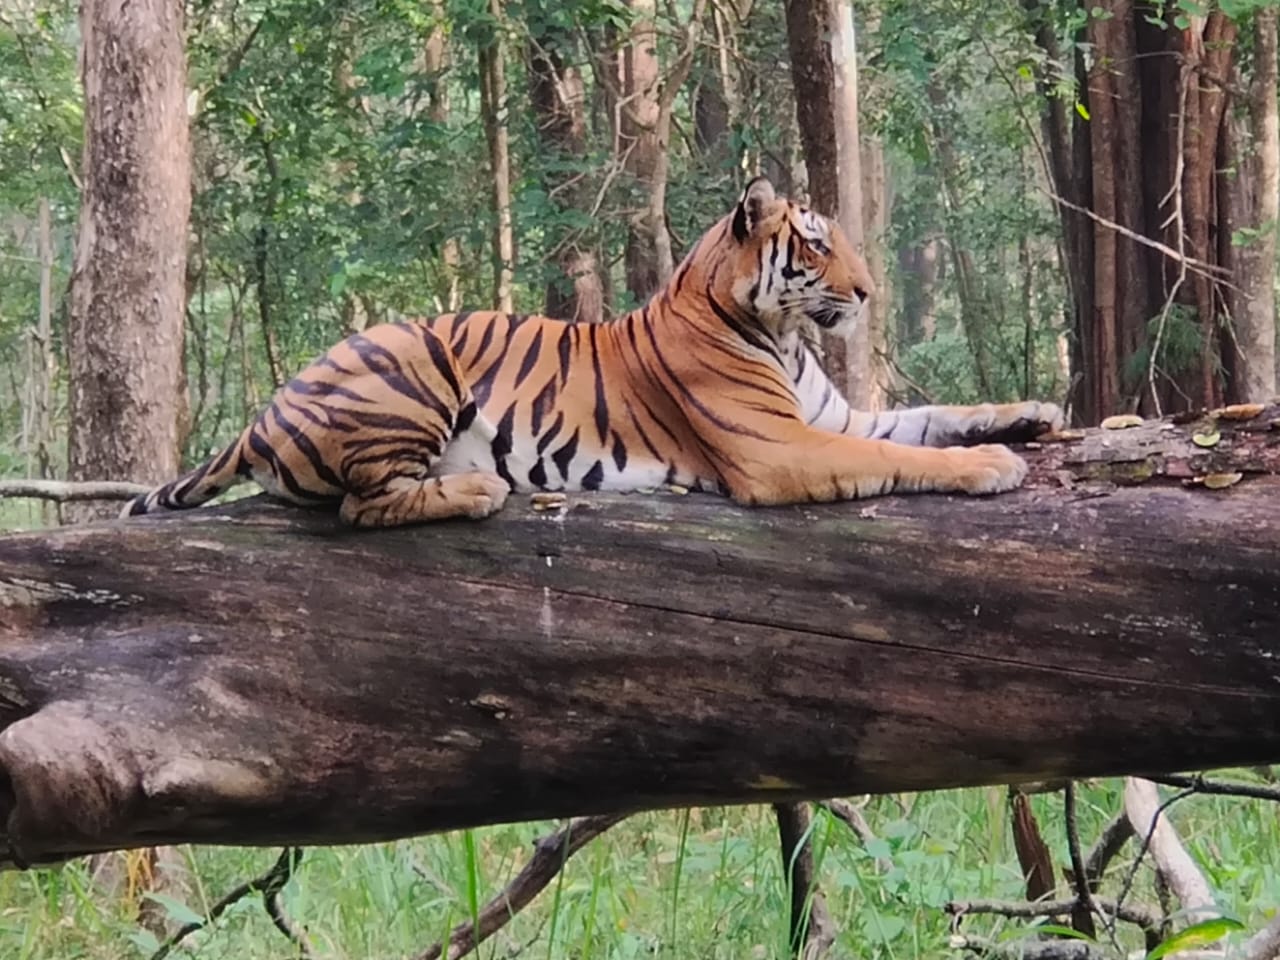 A male tiger given the majestic pose in Chikkamagaluru